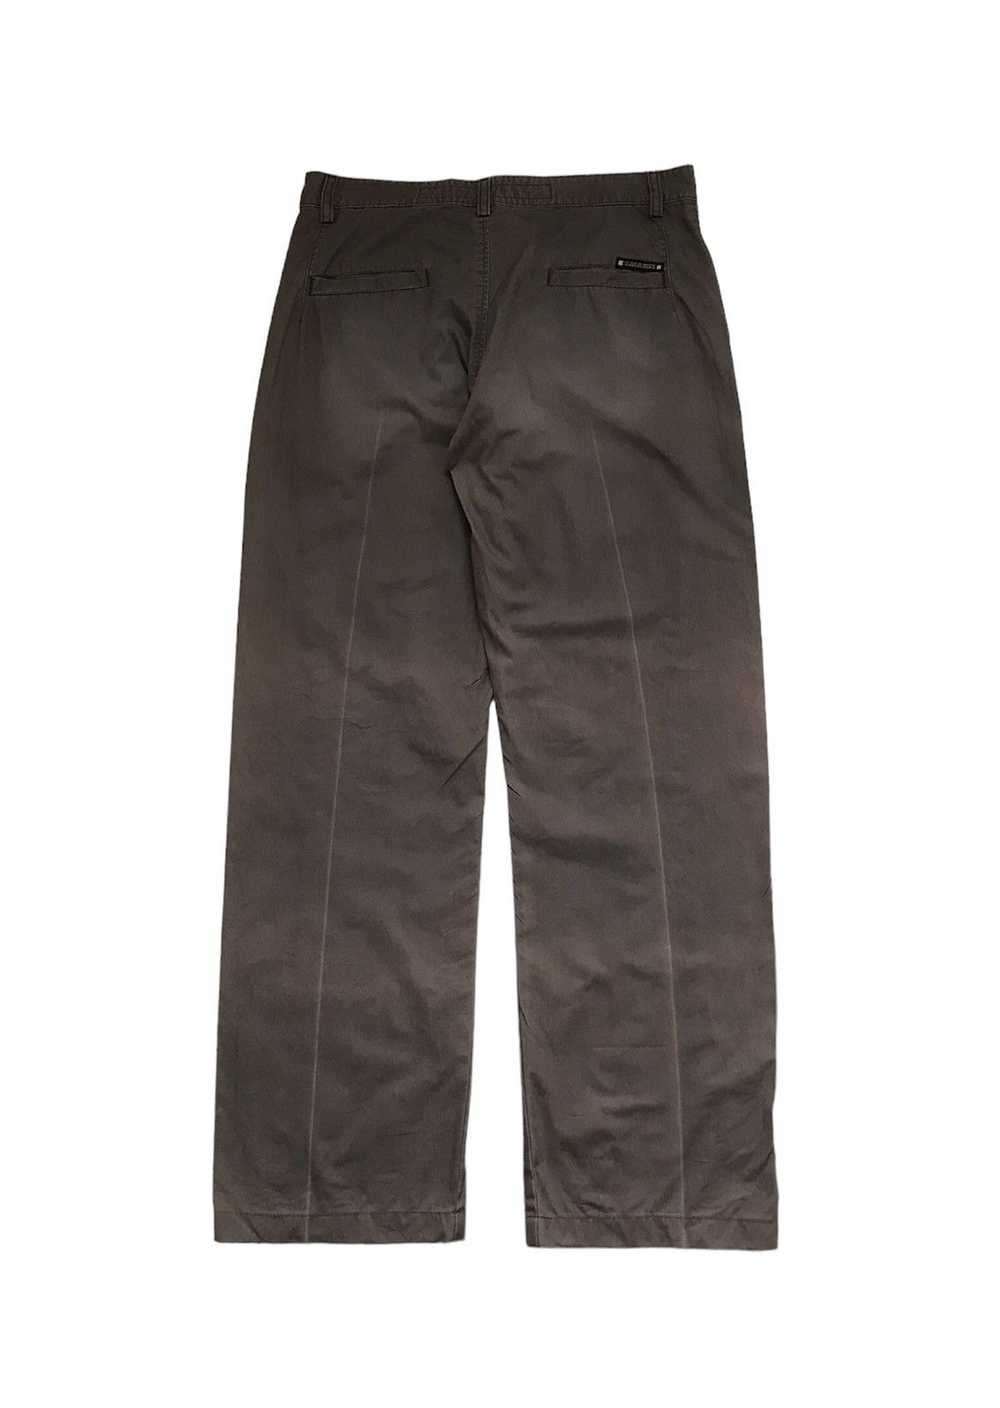 Marithe Francois Girbaud MFG Curved Seam Trousers - image 4